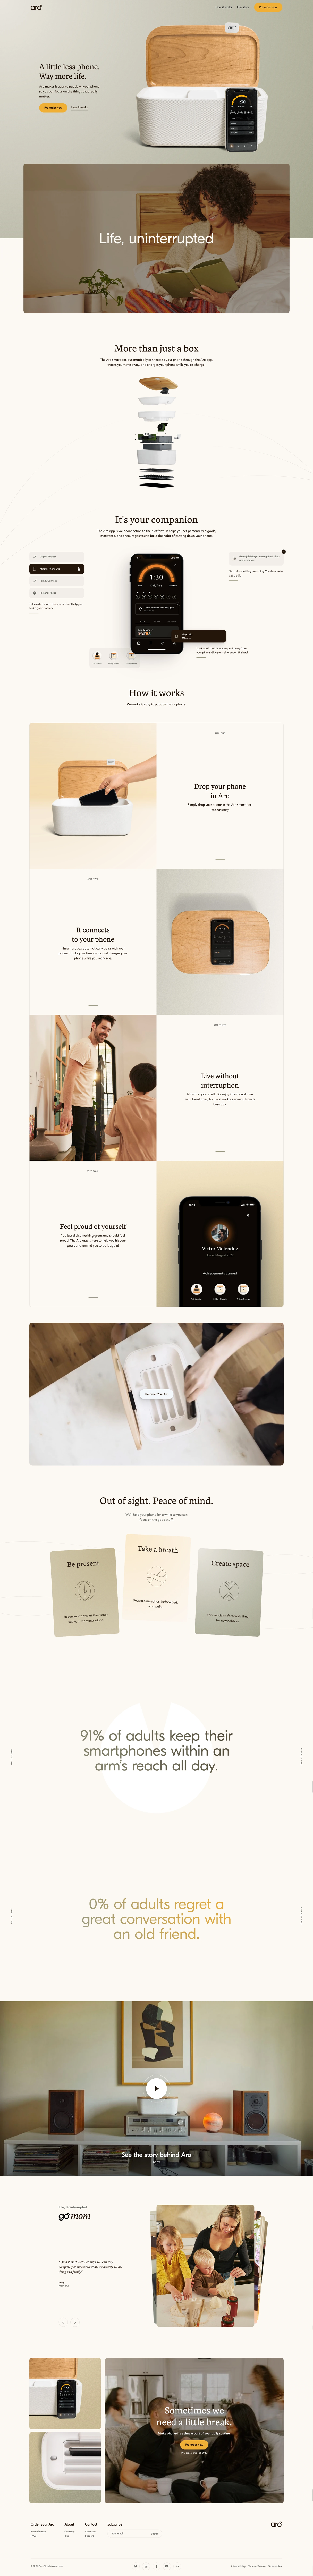 Aro Landing Page Example: The Aro smart box and app make it easy to put down your phone so you can focus on the things that really matter.